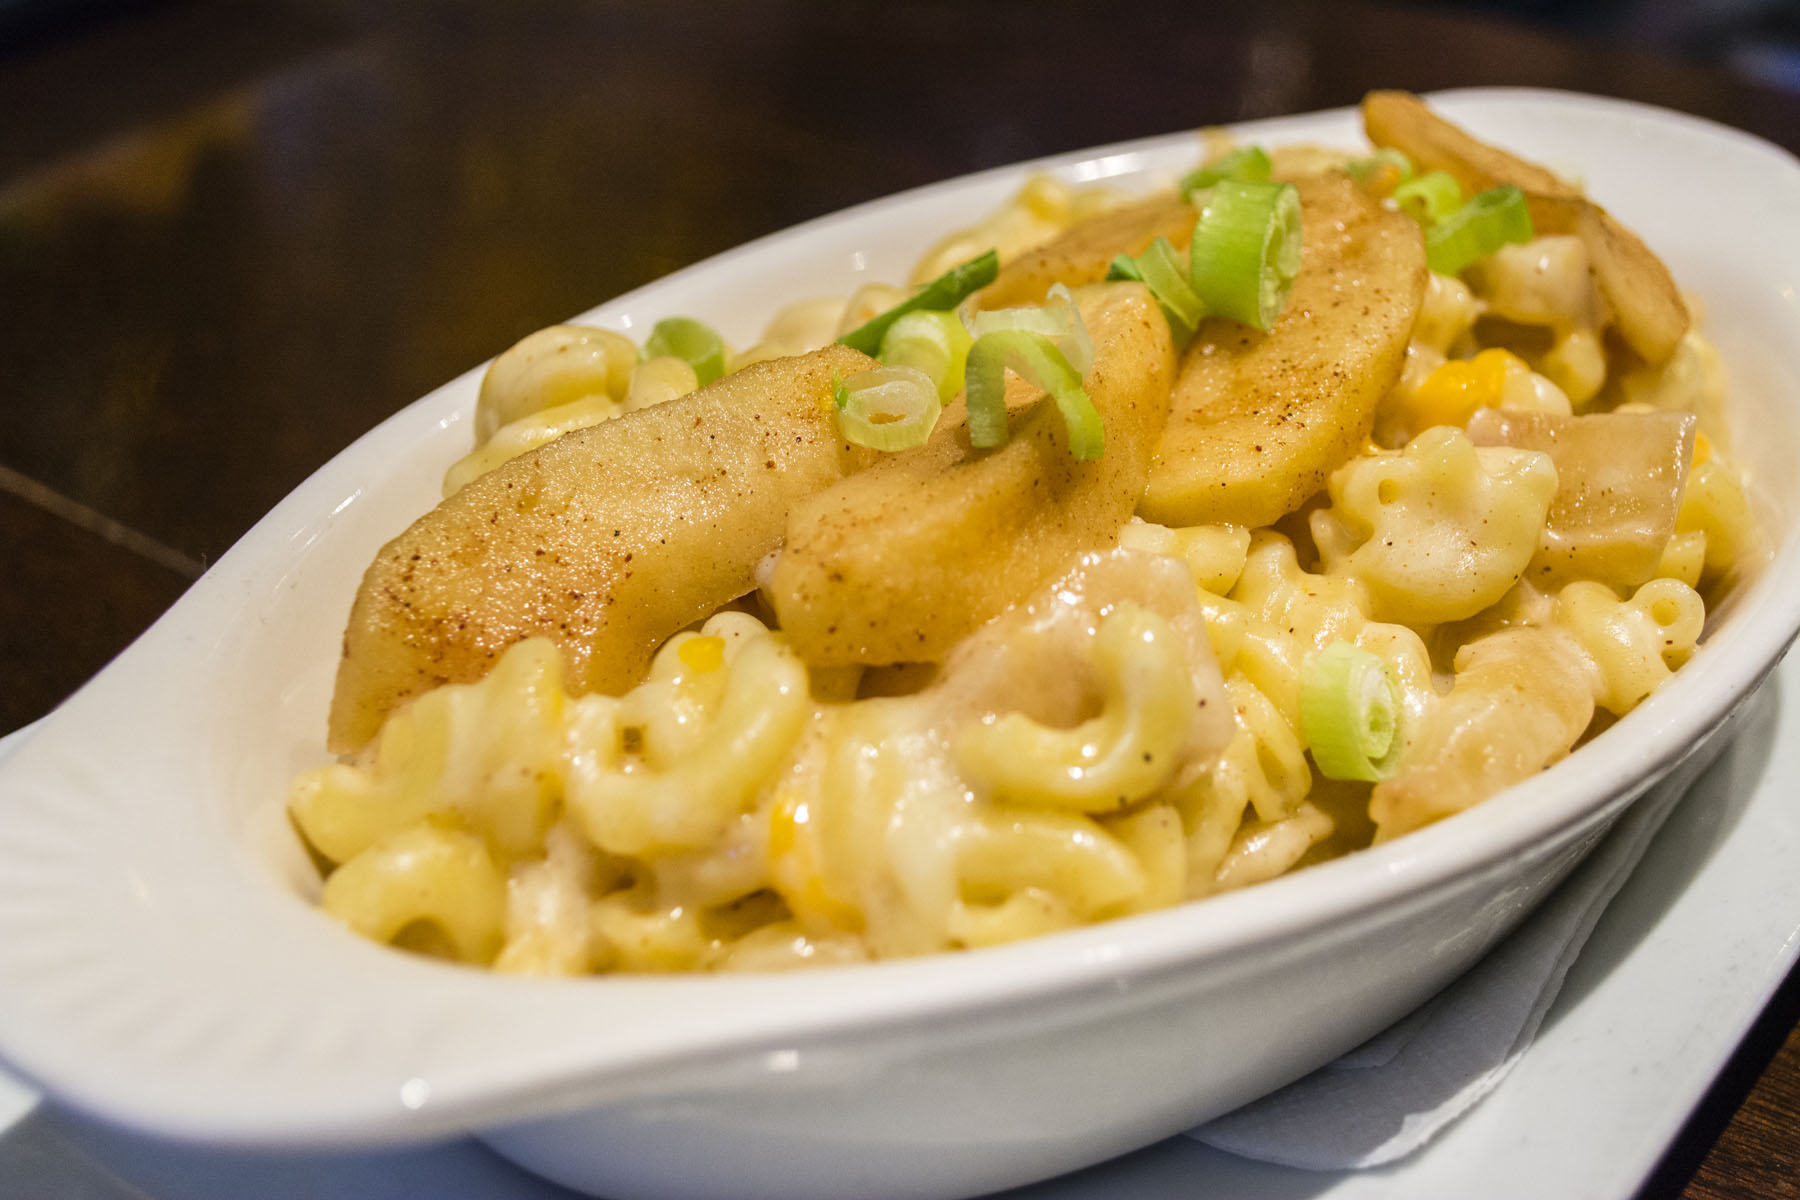   The Apple Cheddar Mac and Cheese ($13) combines apple slices, cinnamon, and cheese to create the perfect blend of savory and sweet.  